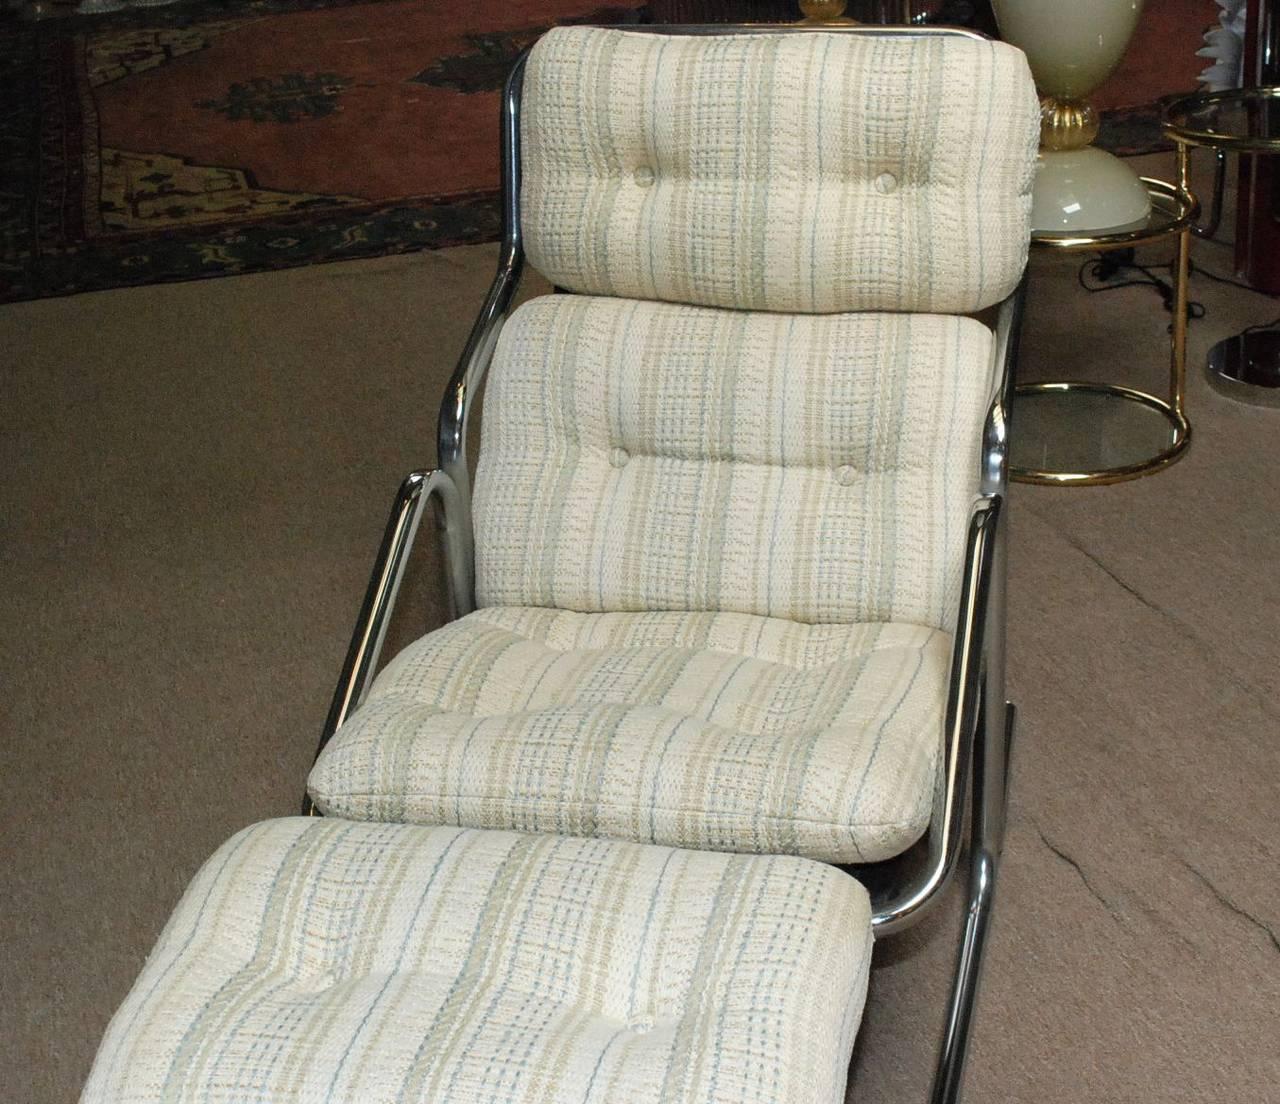 Midcentury chrome lounger with original chenille upholstery. Designed by Jerry Johnson in 1970s, made in USA.
Measures: Length 56